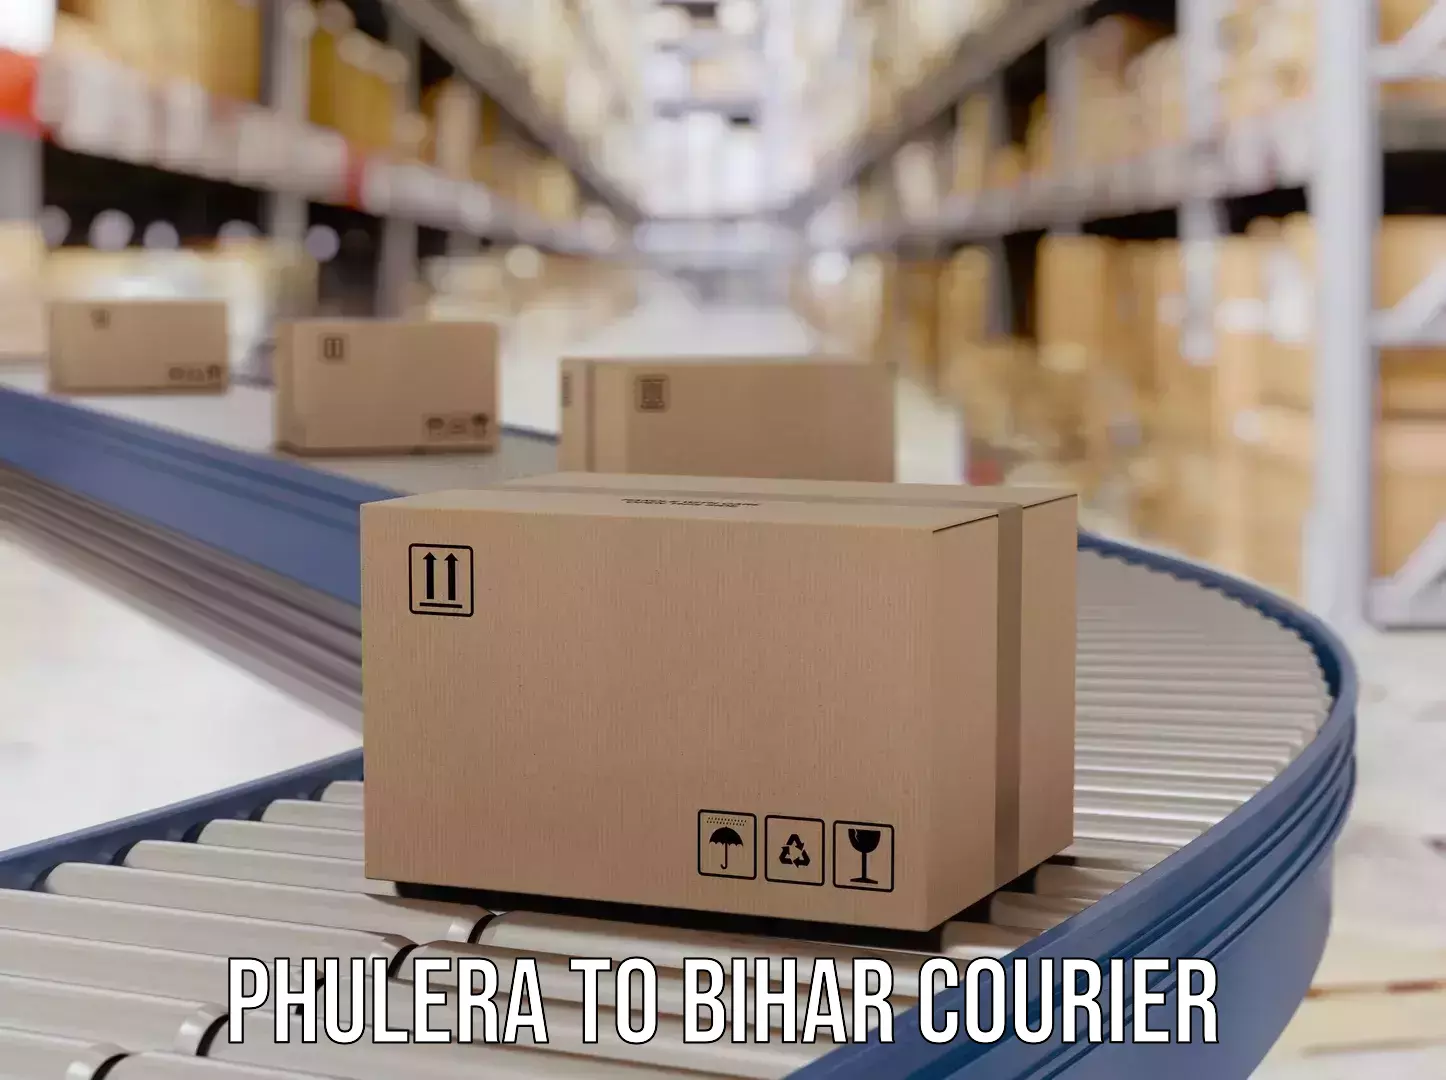 Courier service innovation in Phulera to Mahnar Bazar